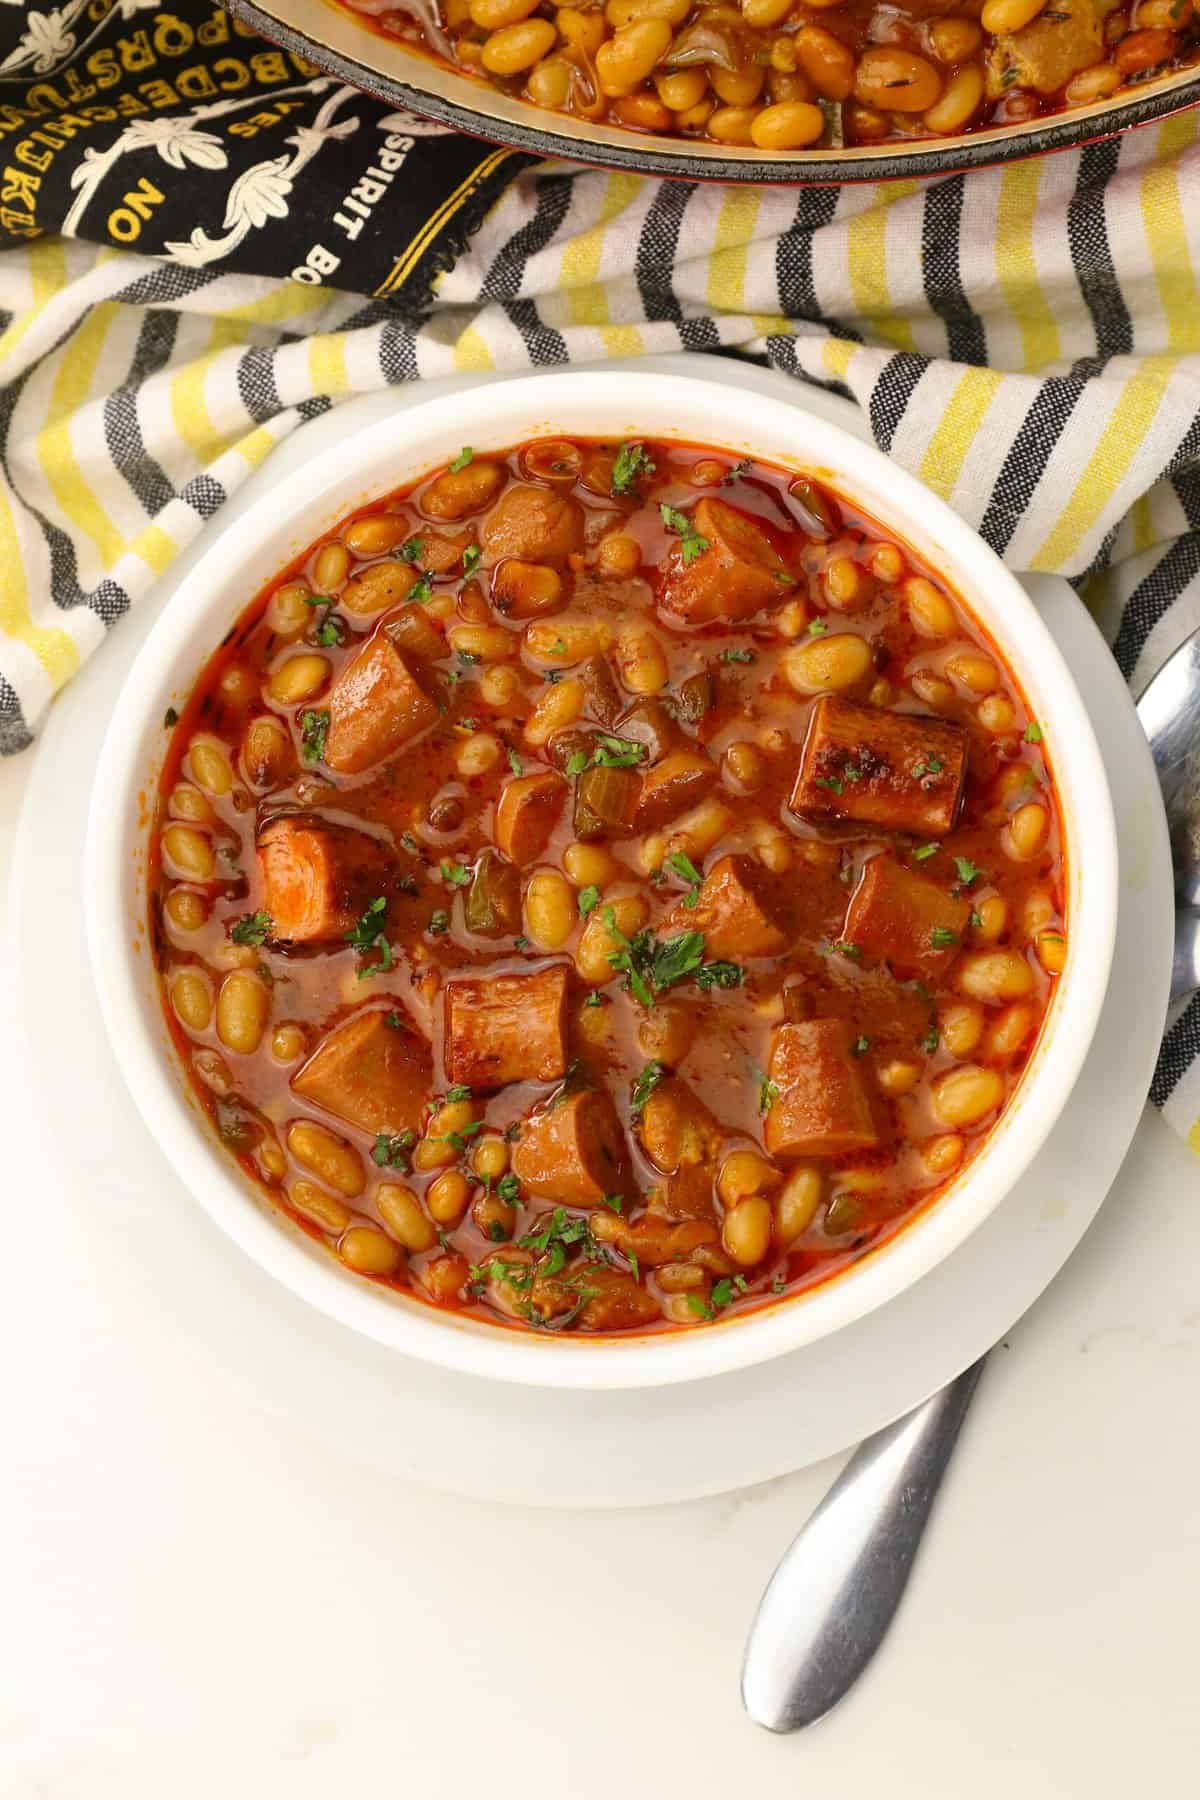 Serving up a comfort food bowl of frank and beans (beanie weenies)